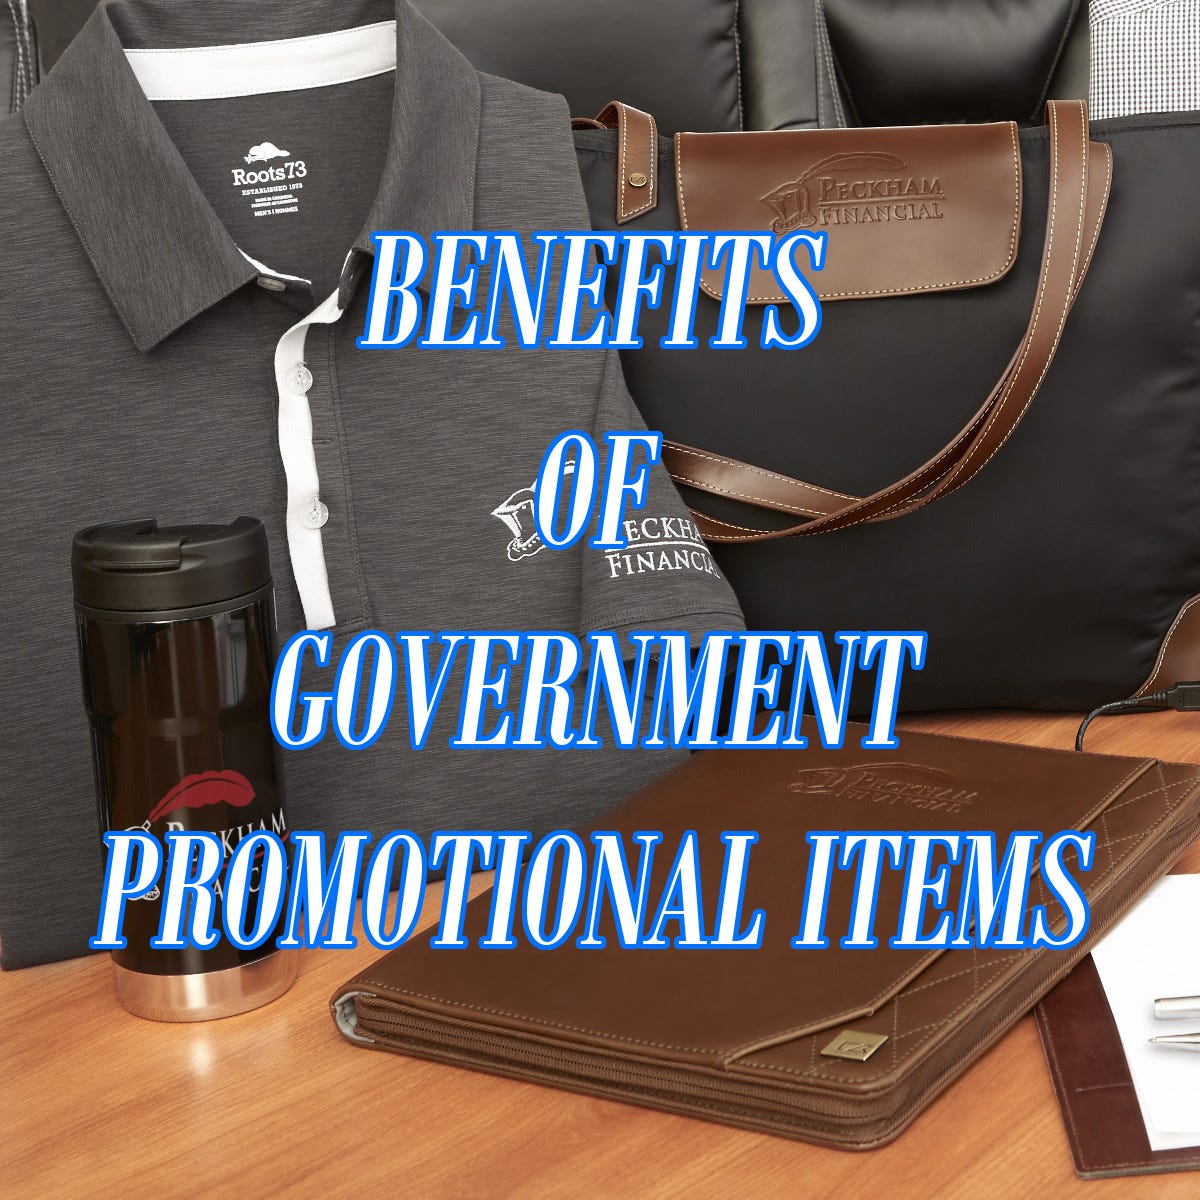 Benefits of Government Promotional Items | by Jean Pierre François | Medium